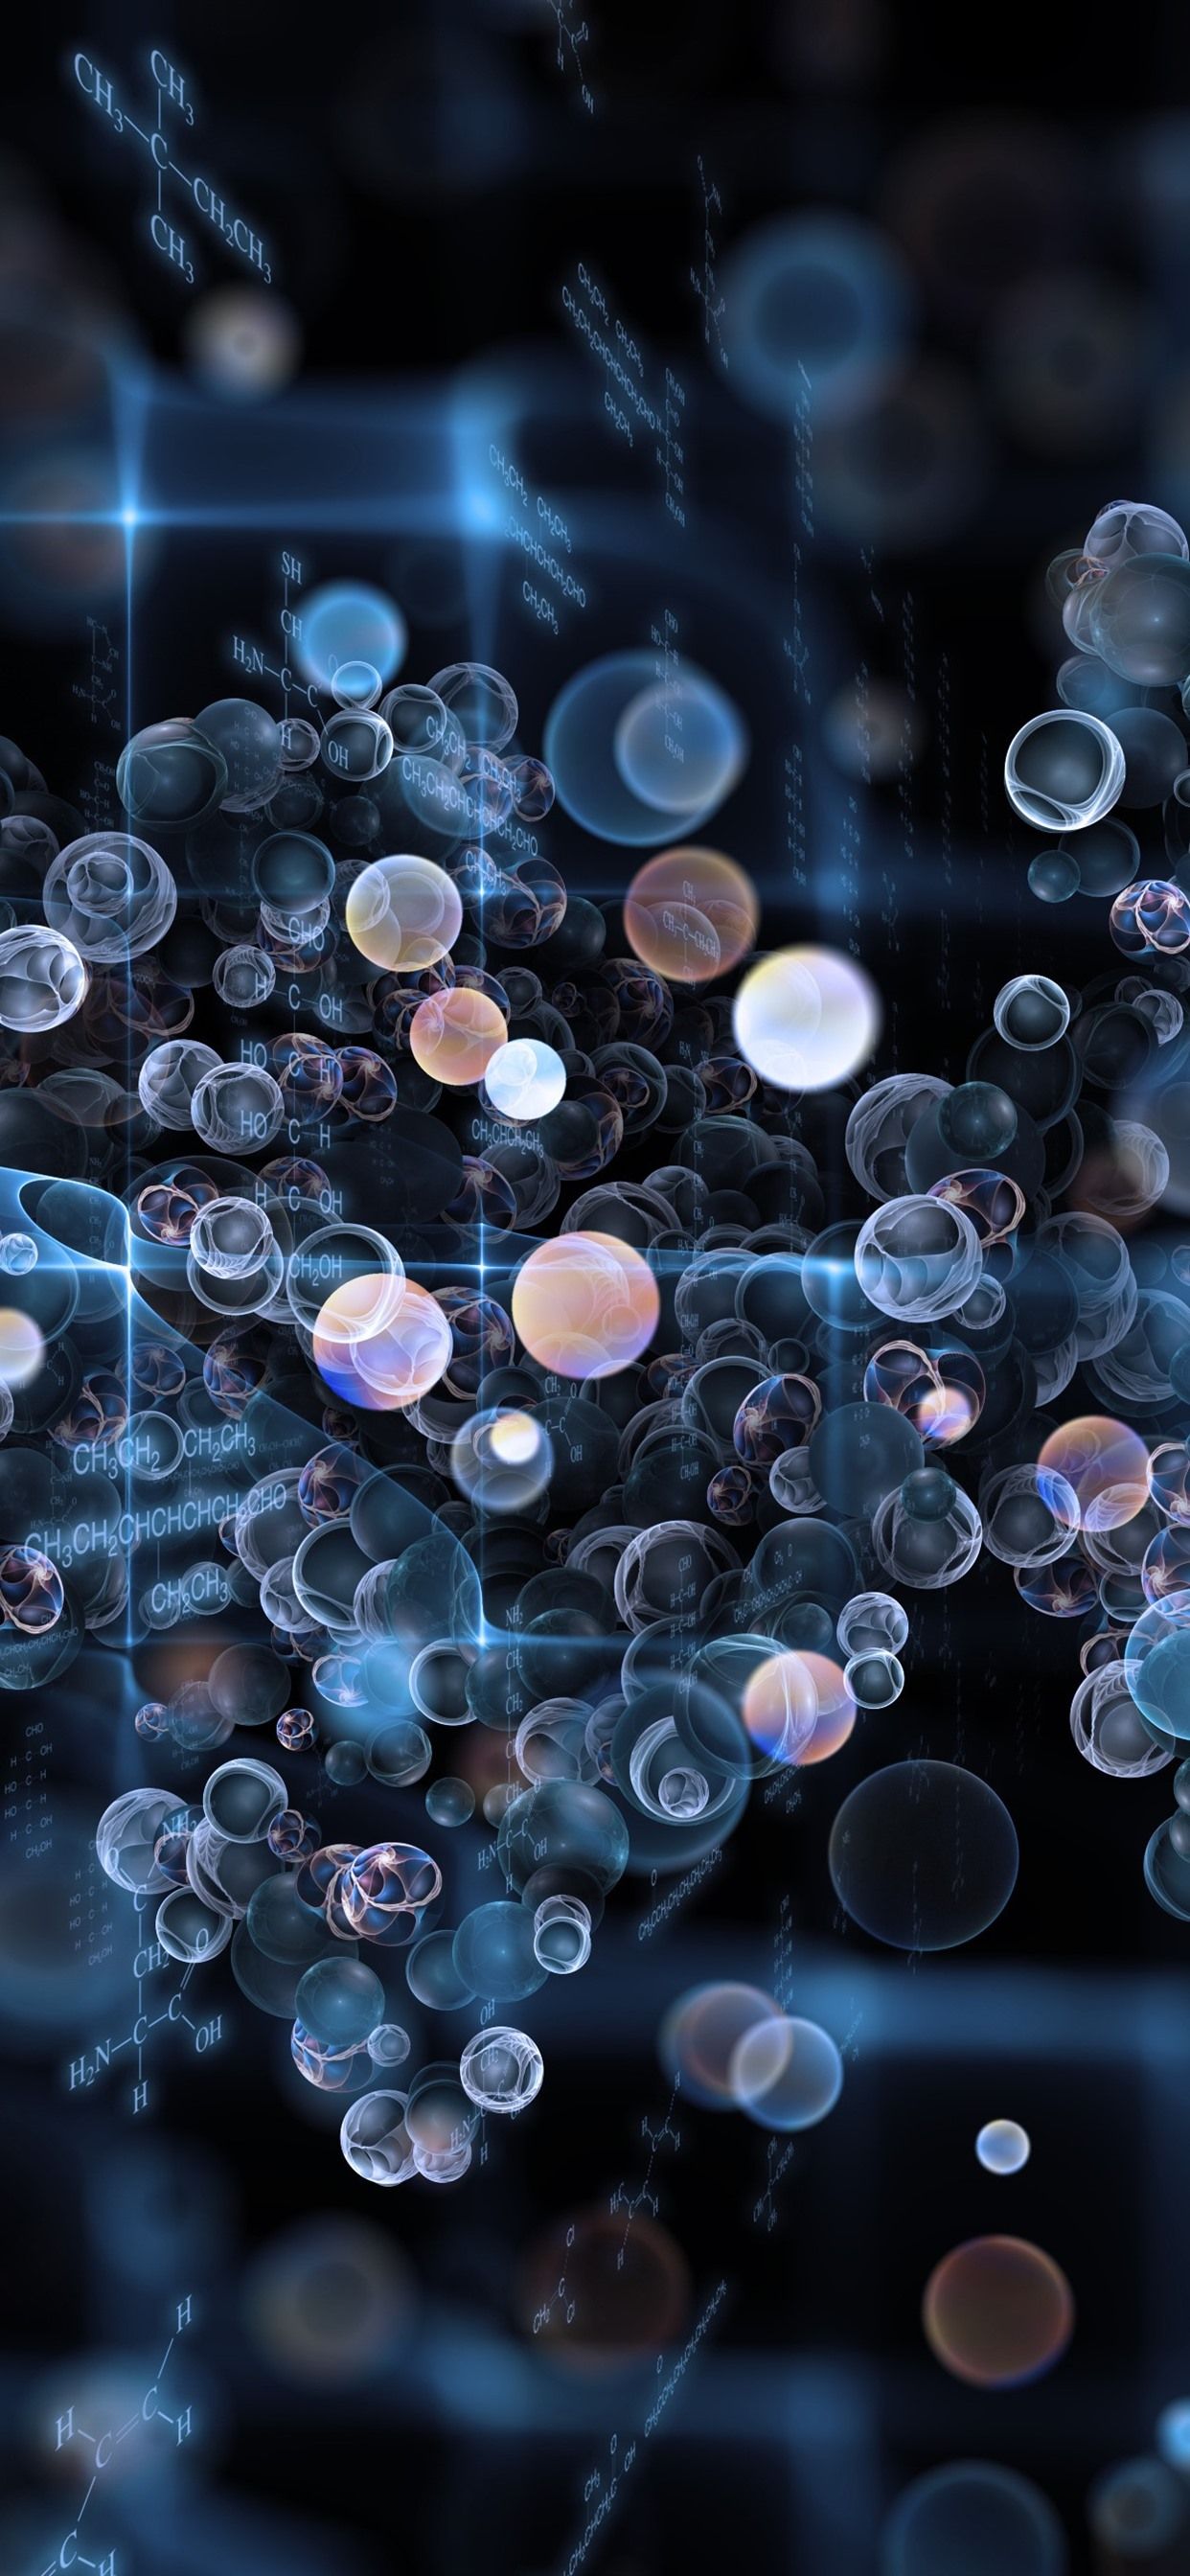 Chemistry, Bubbles, Abstract Design 1242x2688 IPhone 11 Pro XS Max